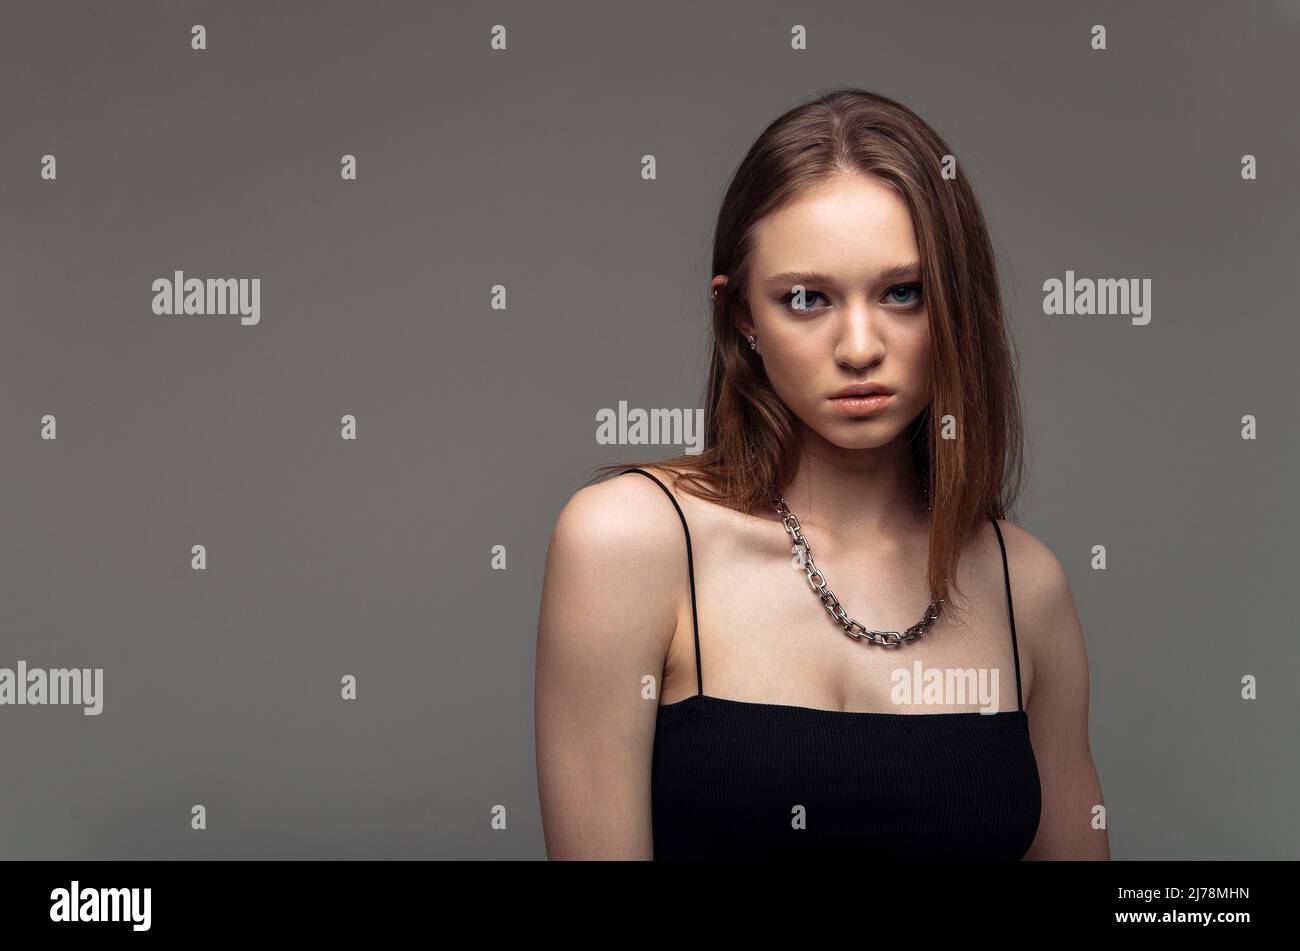 Portrait of sophisticated young woman advertising products and services. Stock Photo